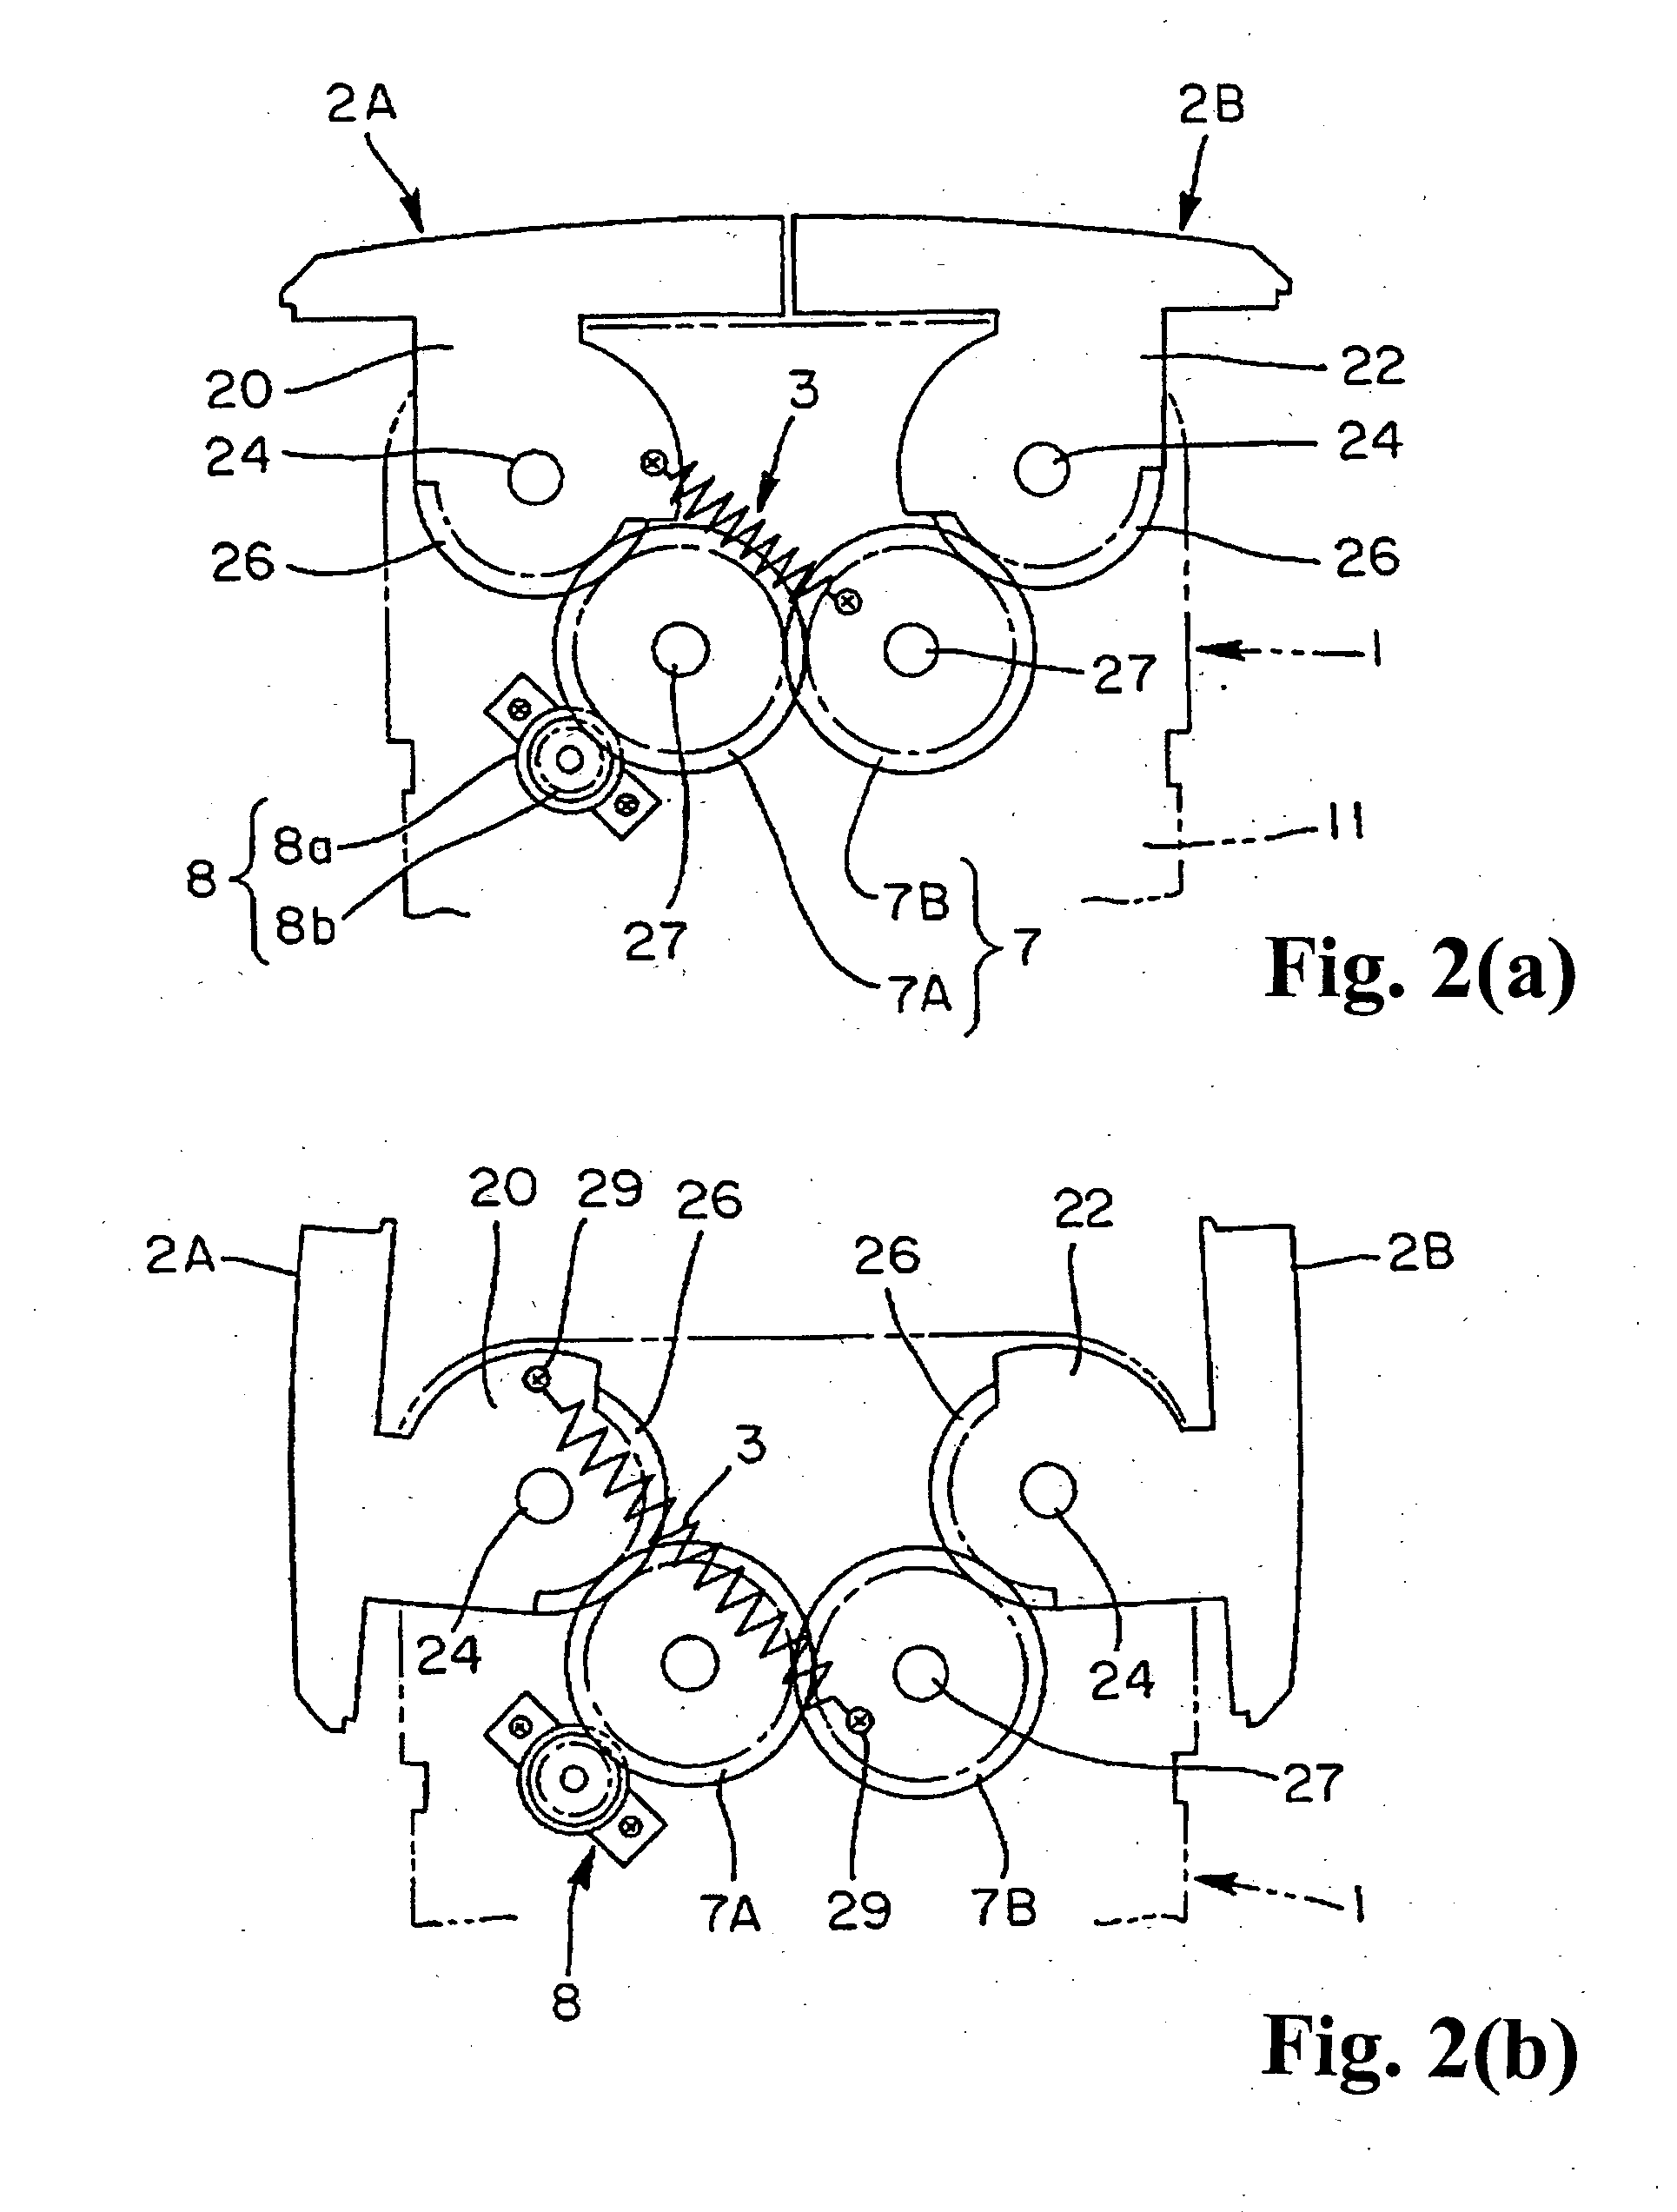 Cover opening and closing device